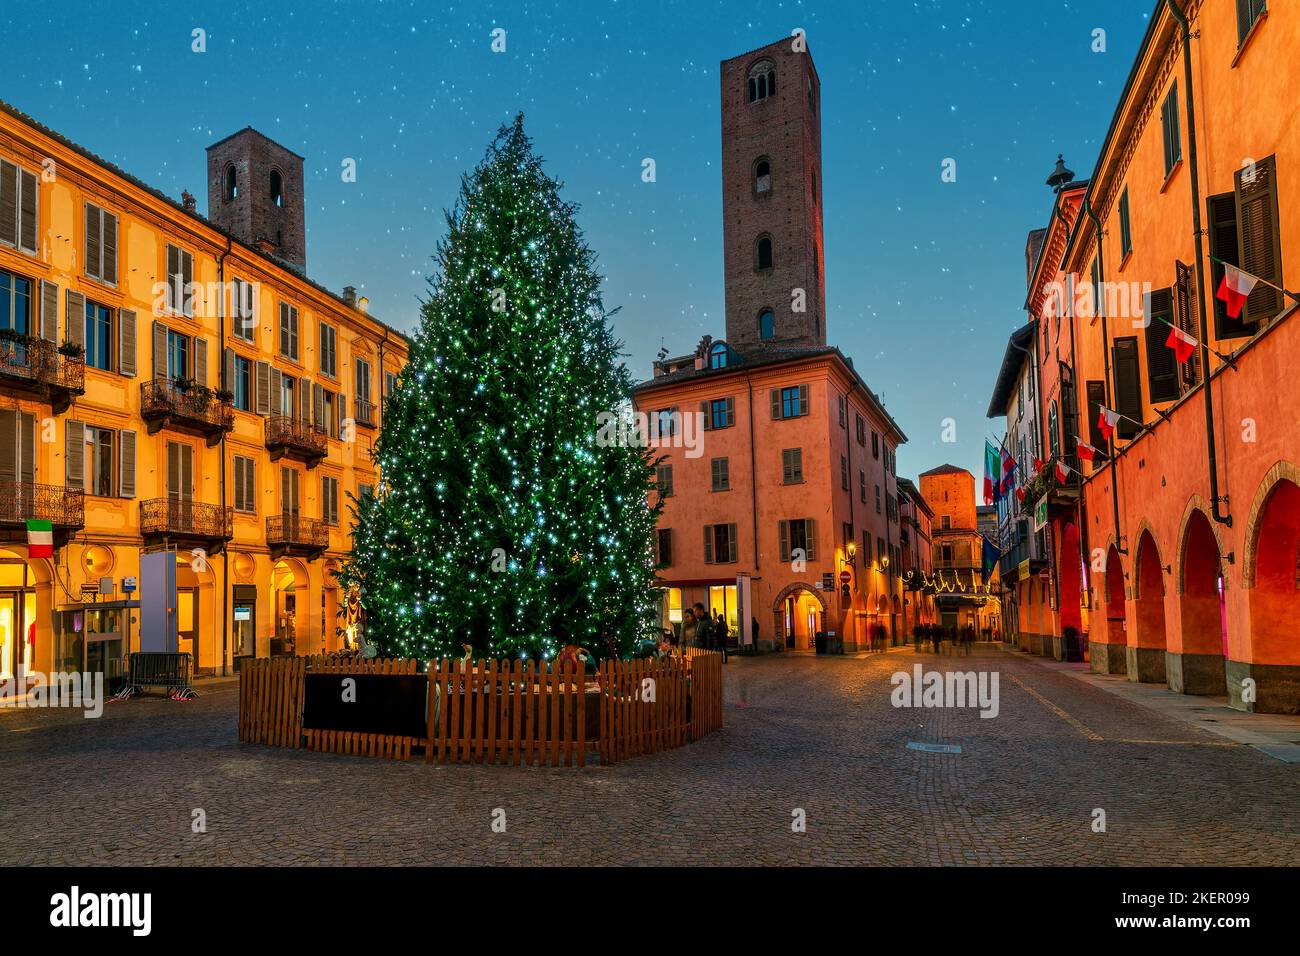 Illuminated Christmas tree on cobblestone town square among old historic buildings in Alba, Piedmont, Northern Italy. Stock Photo